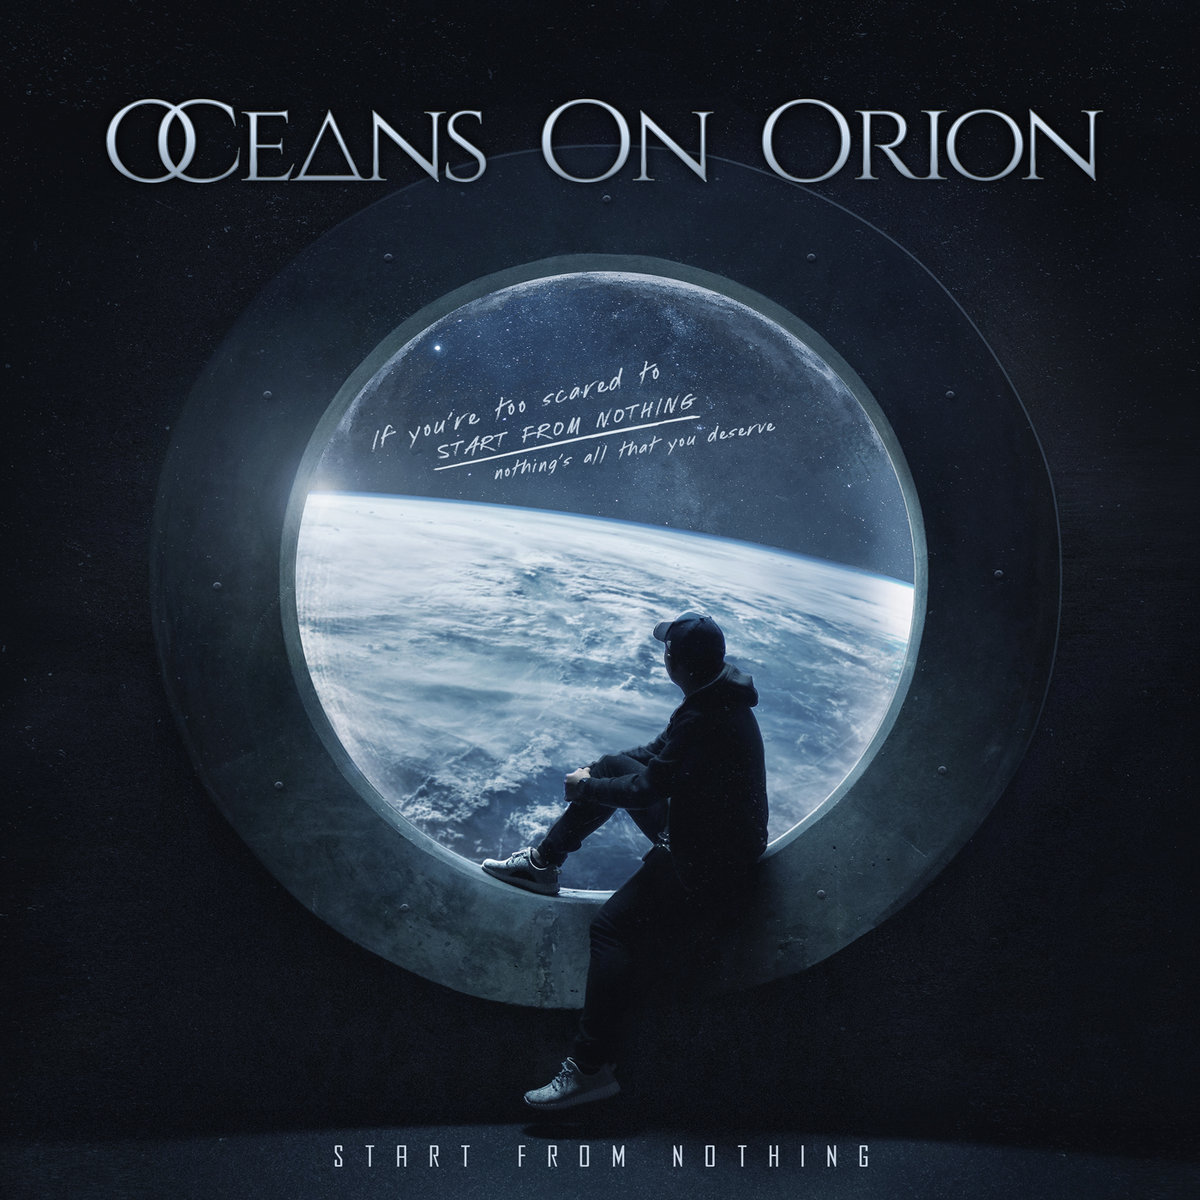 Oceans on Orion – Start from Nothing